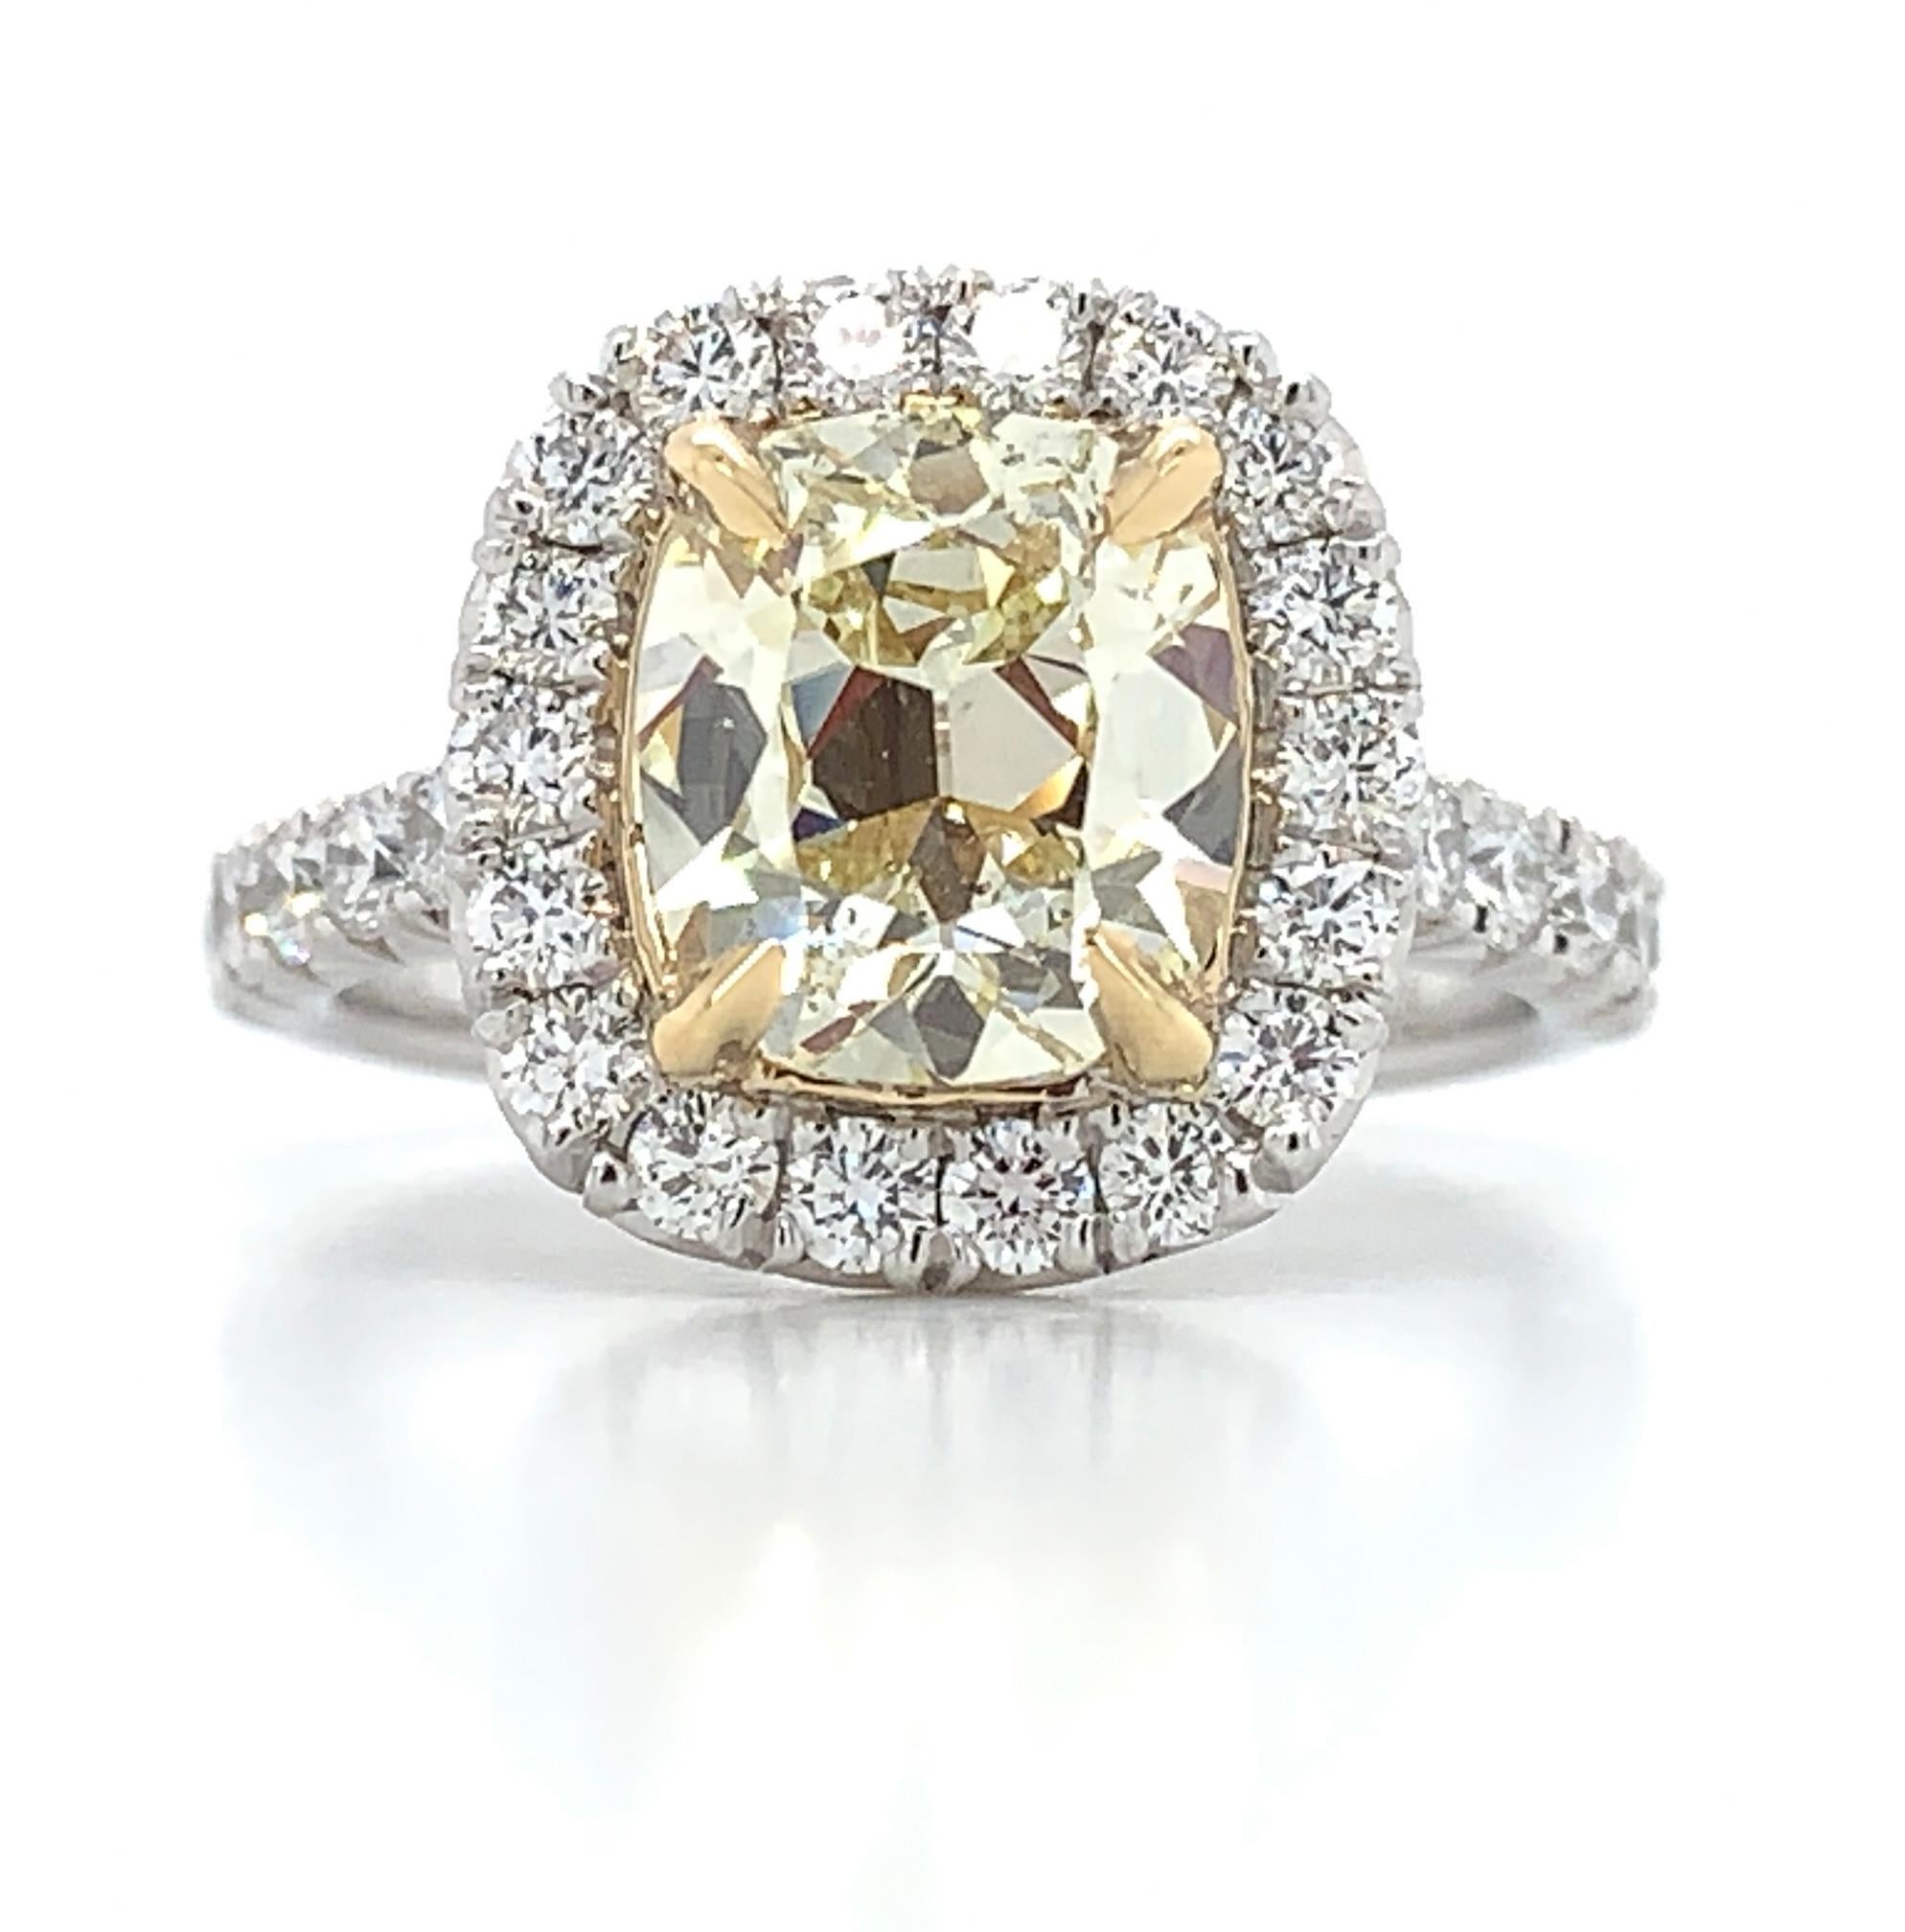 Canary Fancy Light Yellow Diamond Engagement Ring with Halo
Metal: Platinum
Diamond: 2.07cts Cushion Cut
Color & Quality: FLY - I1
Pave / Halo: Round Brilliant cut 0.78cts diamonds
Certified: GIA
SKU: 122937
WE ONLY USE FEDEX SIGNATURE REQUIRED